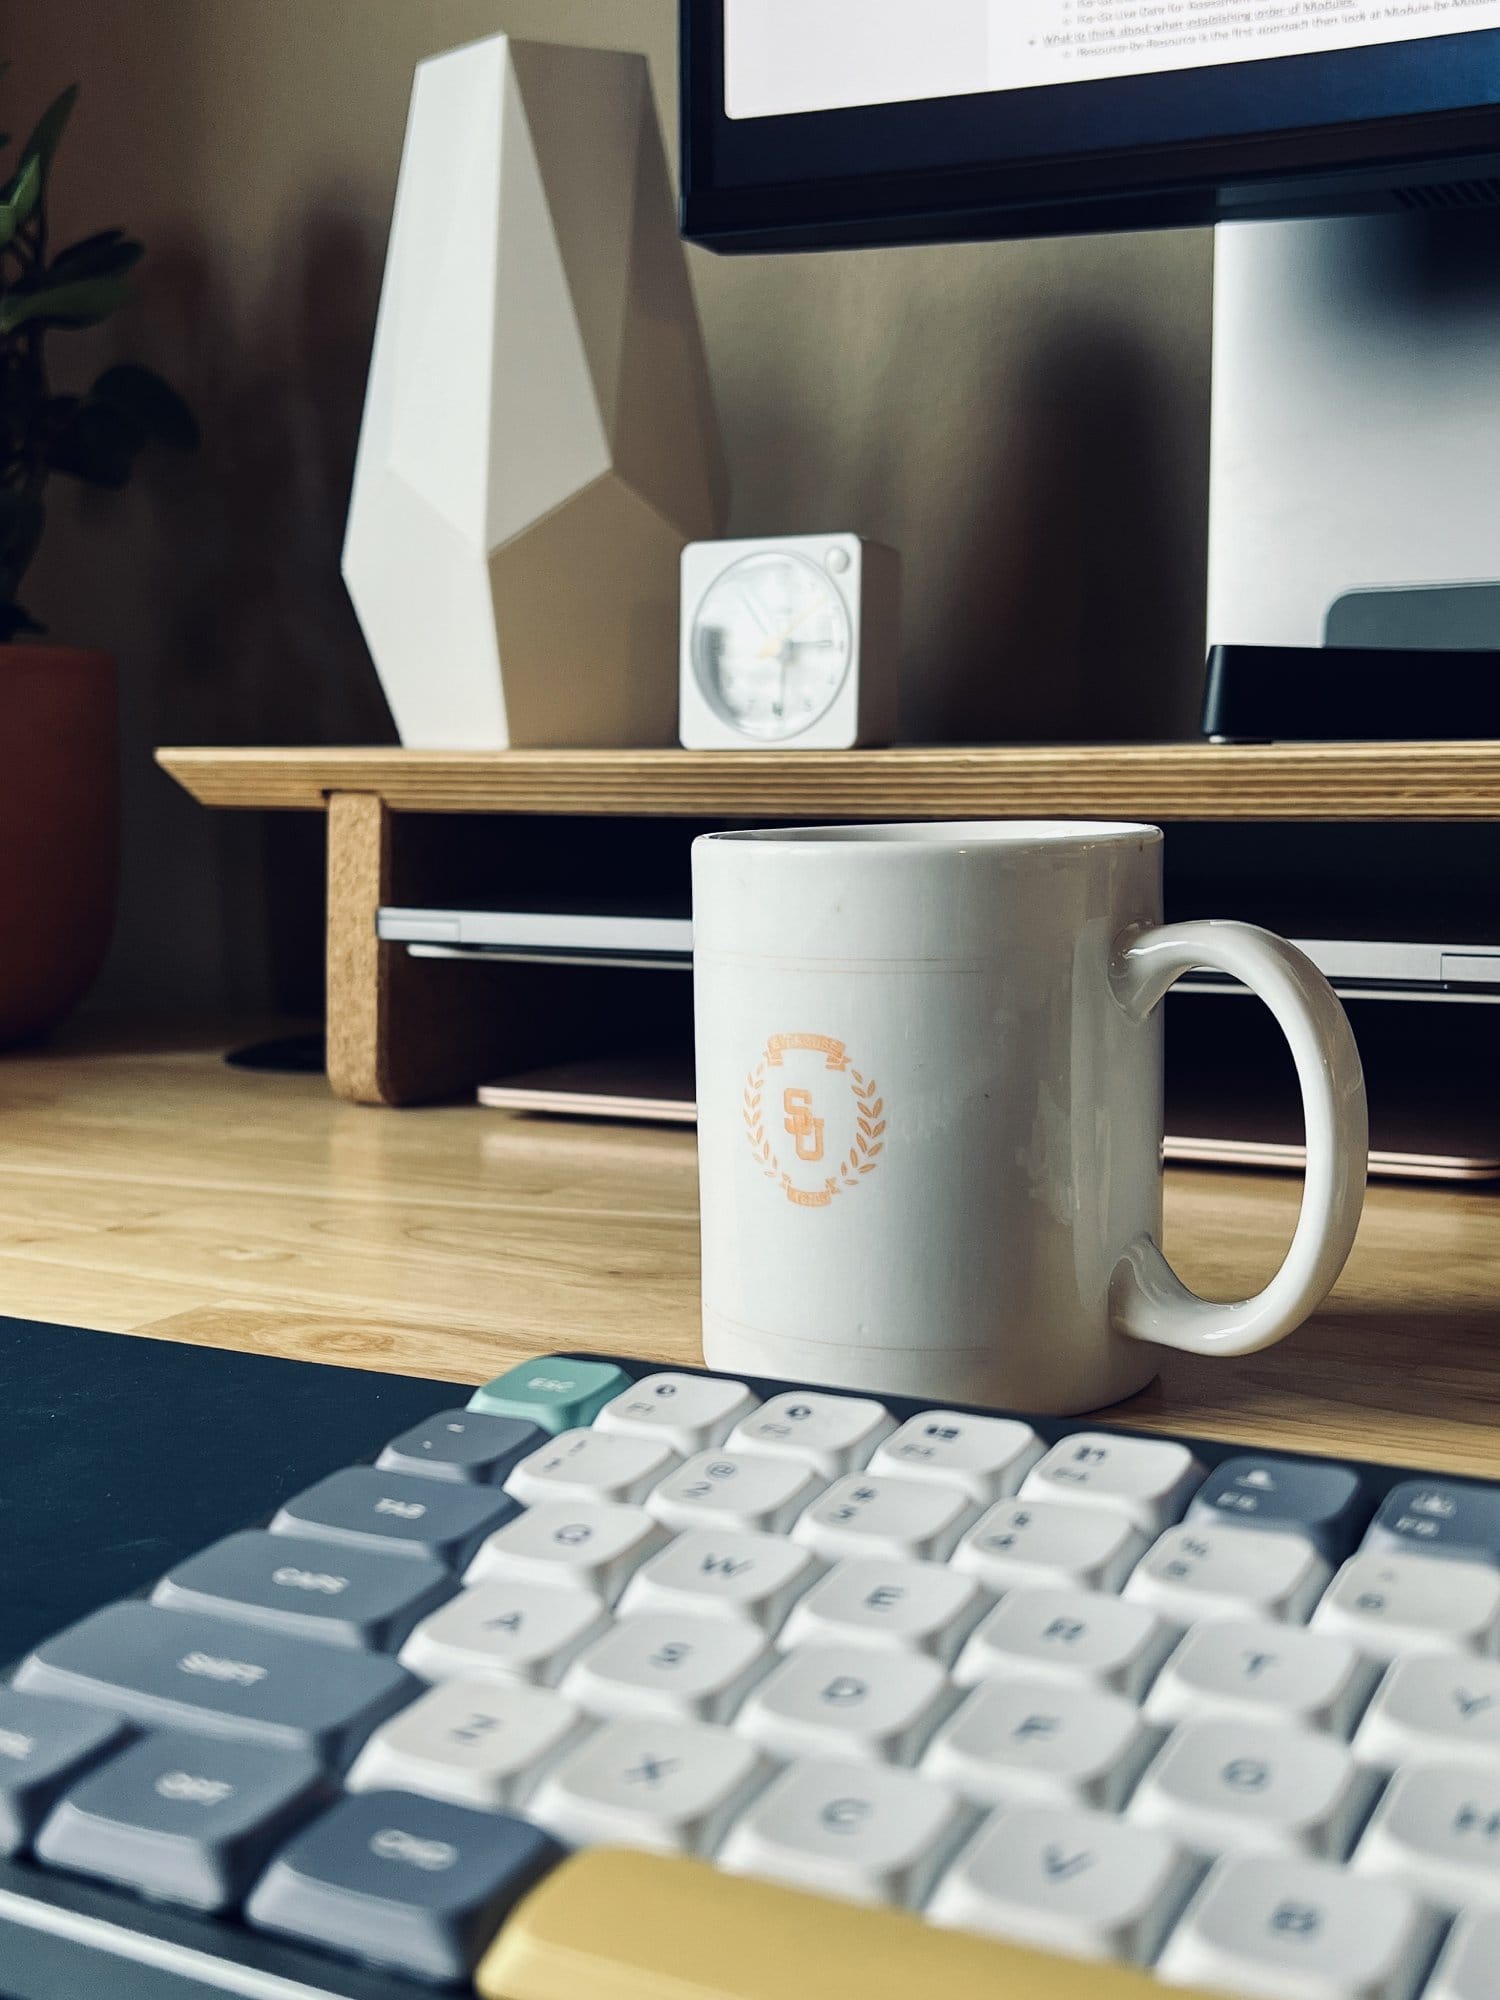 A close-up of a desk showing a part of a mechanical keyboard, a white mug with a logo, and a small clock, with a monitor and a geometric vase in the background